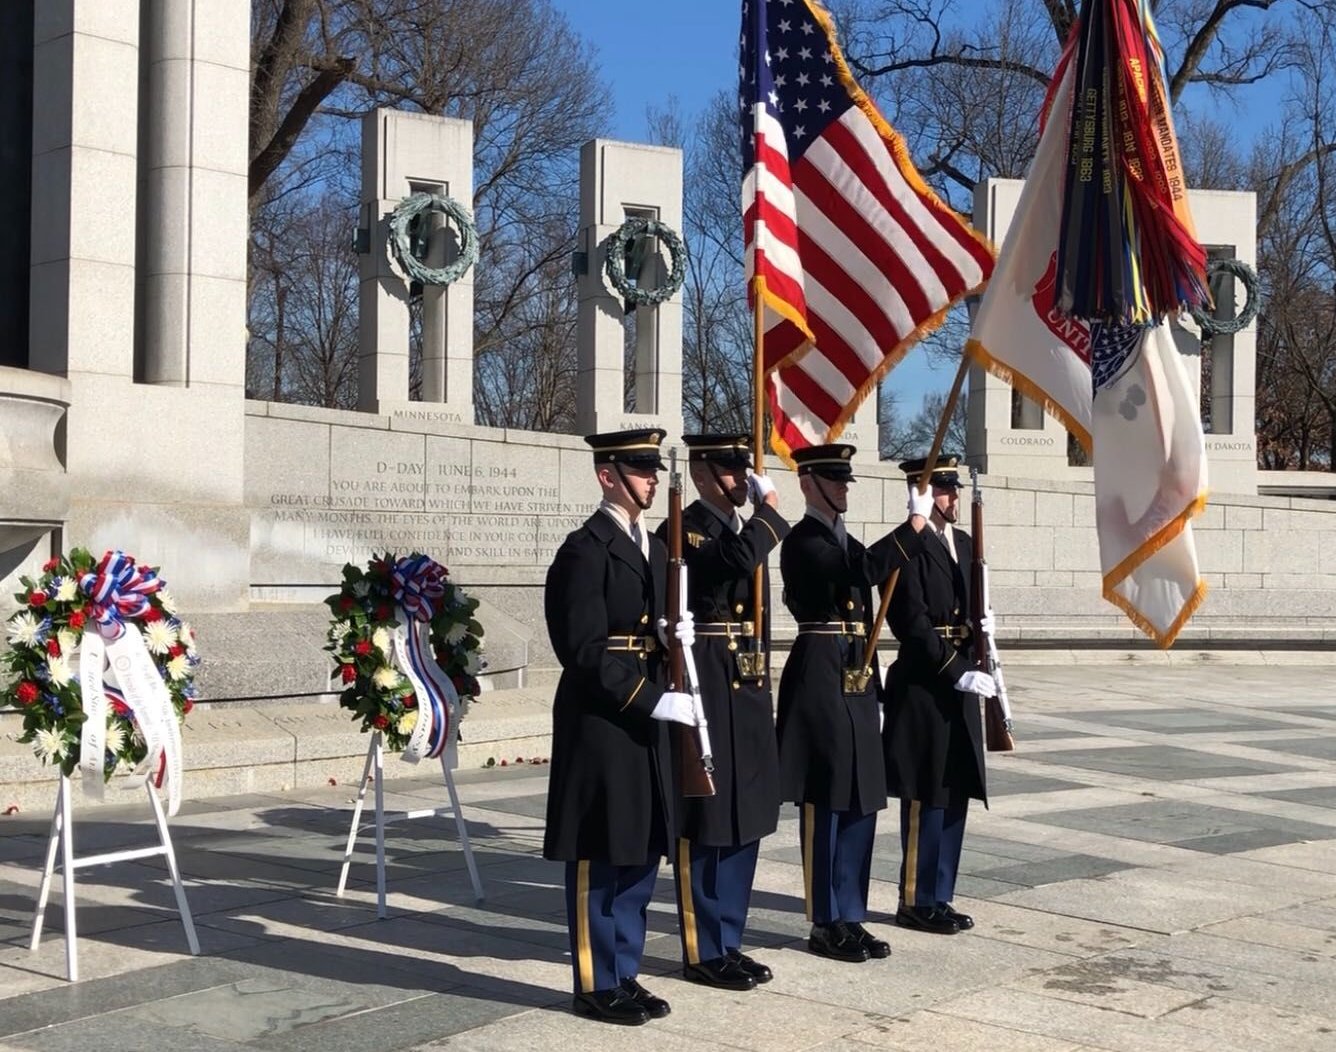 More Americans were honored for bravery at Anzio than in any other World War Two battle. Twenty-two received the Medal of Honor, 7,000 were killed and 36,000 were wounded or went missing. (WTOP/Kristi King)